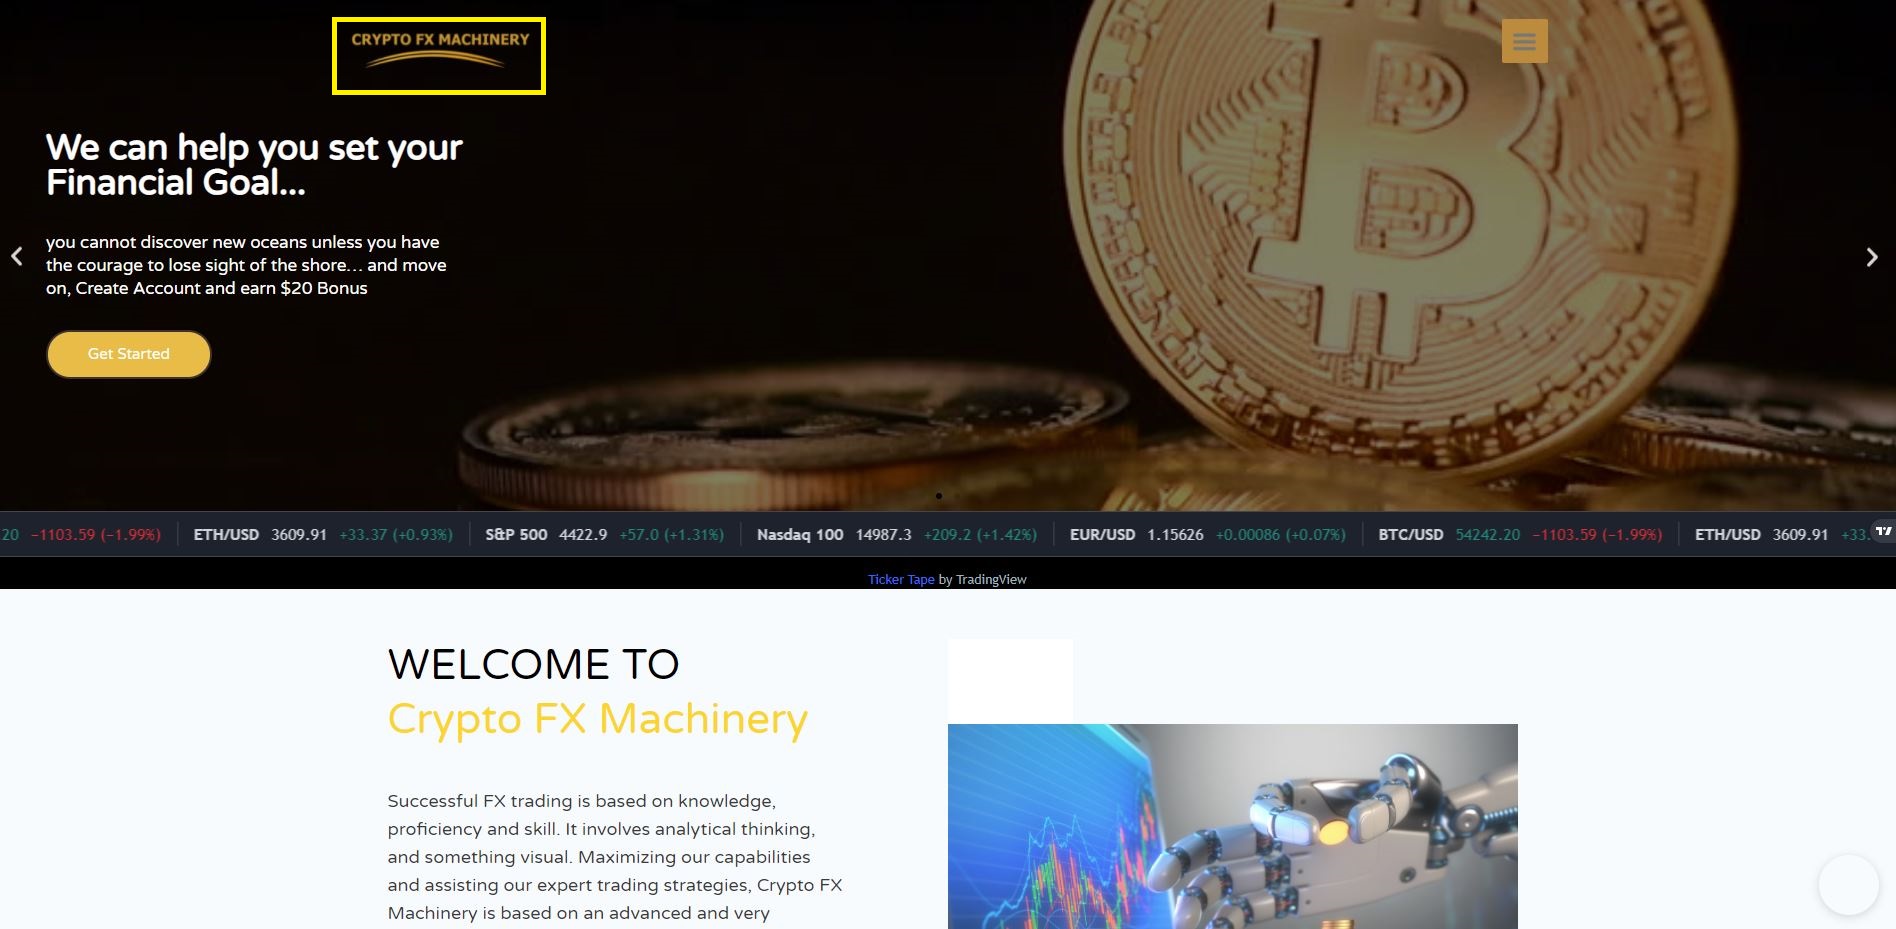 crypto fx machinery scam home page